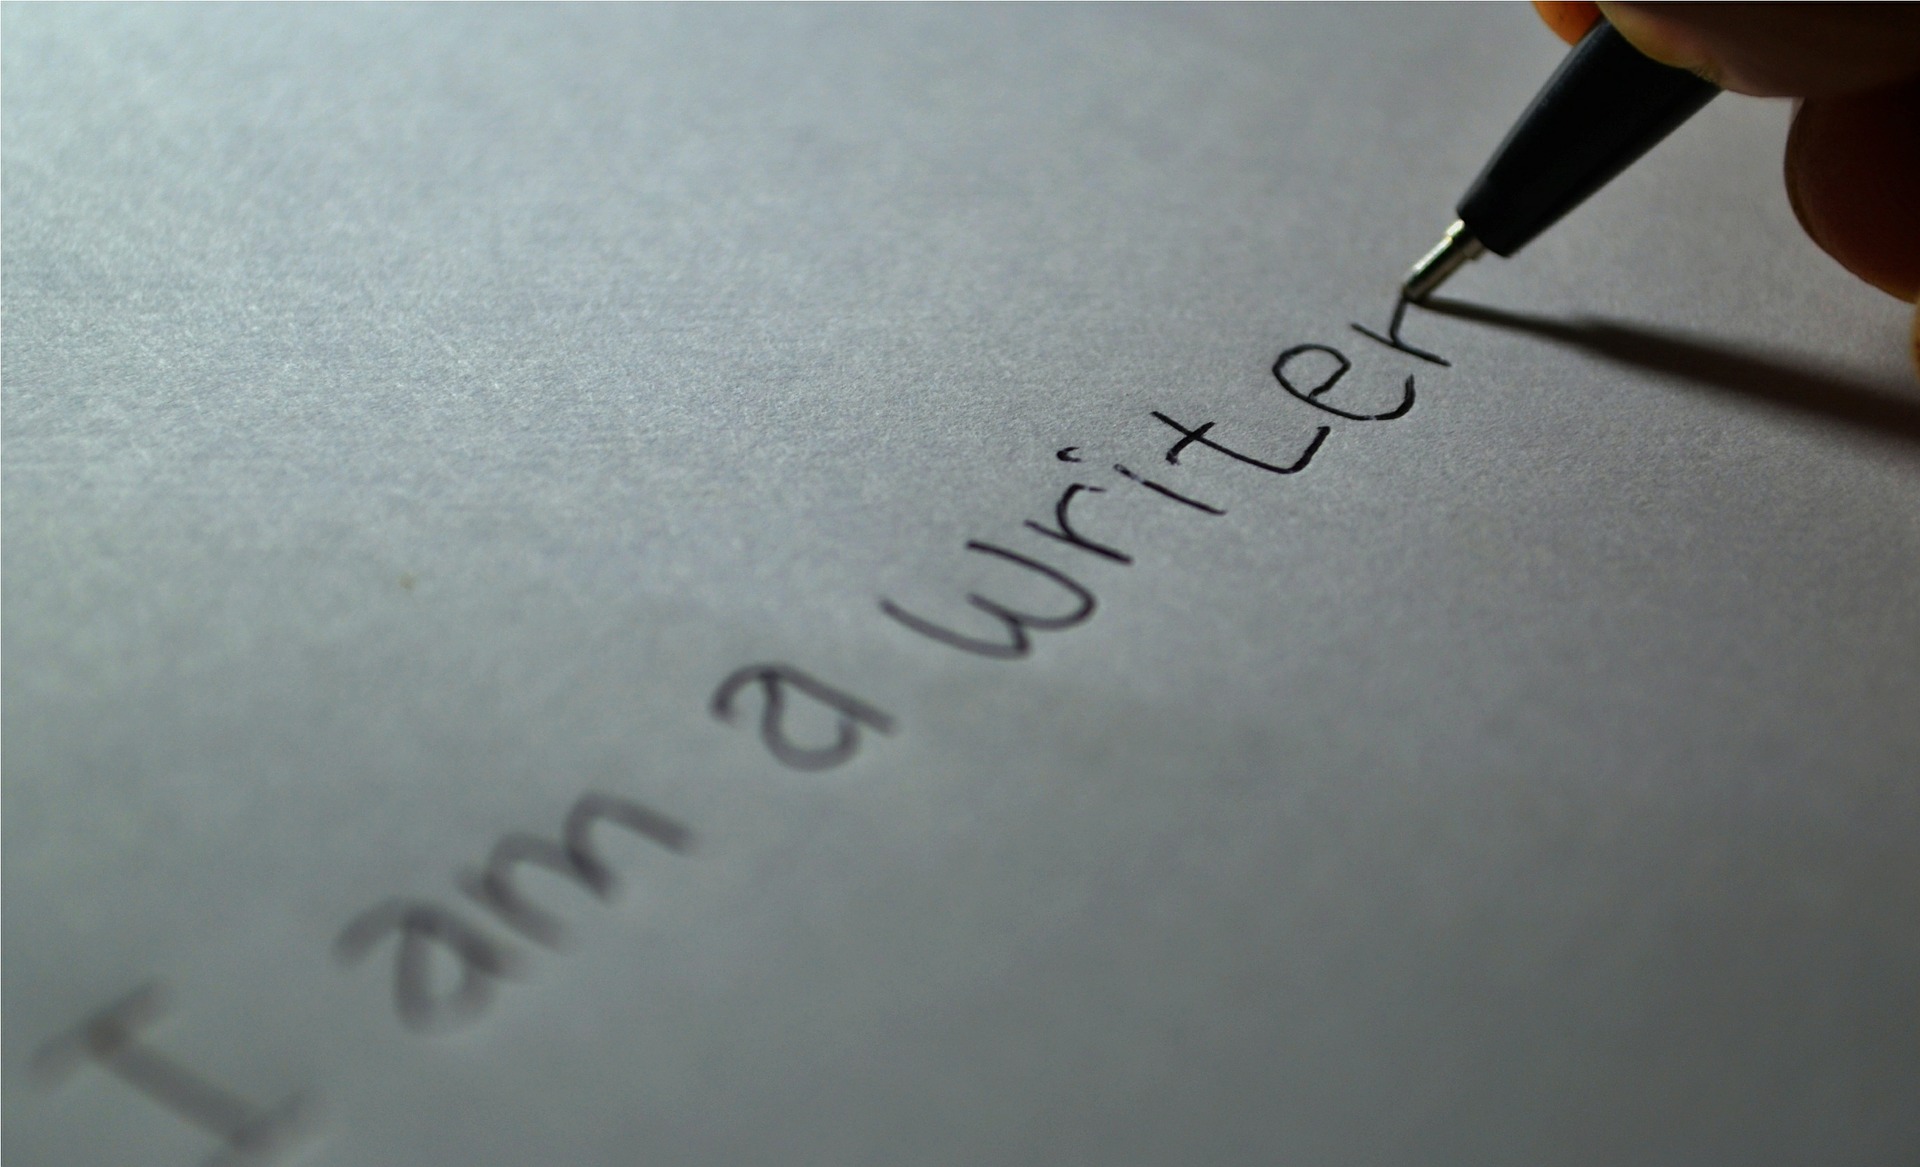 Photograph of person writing "I am a writer."